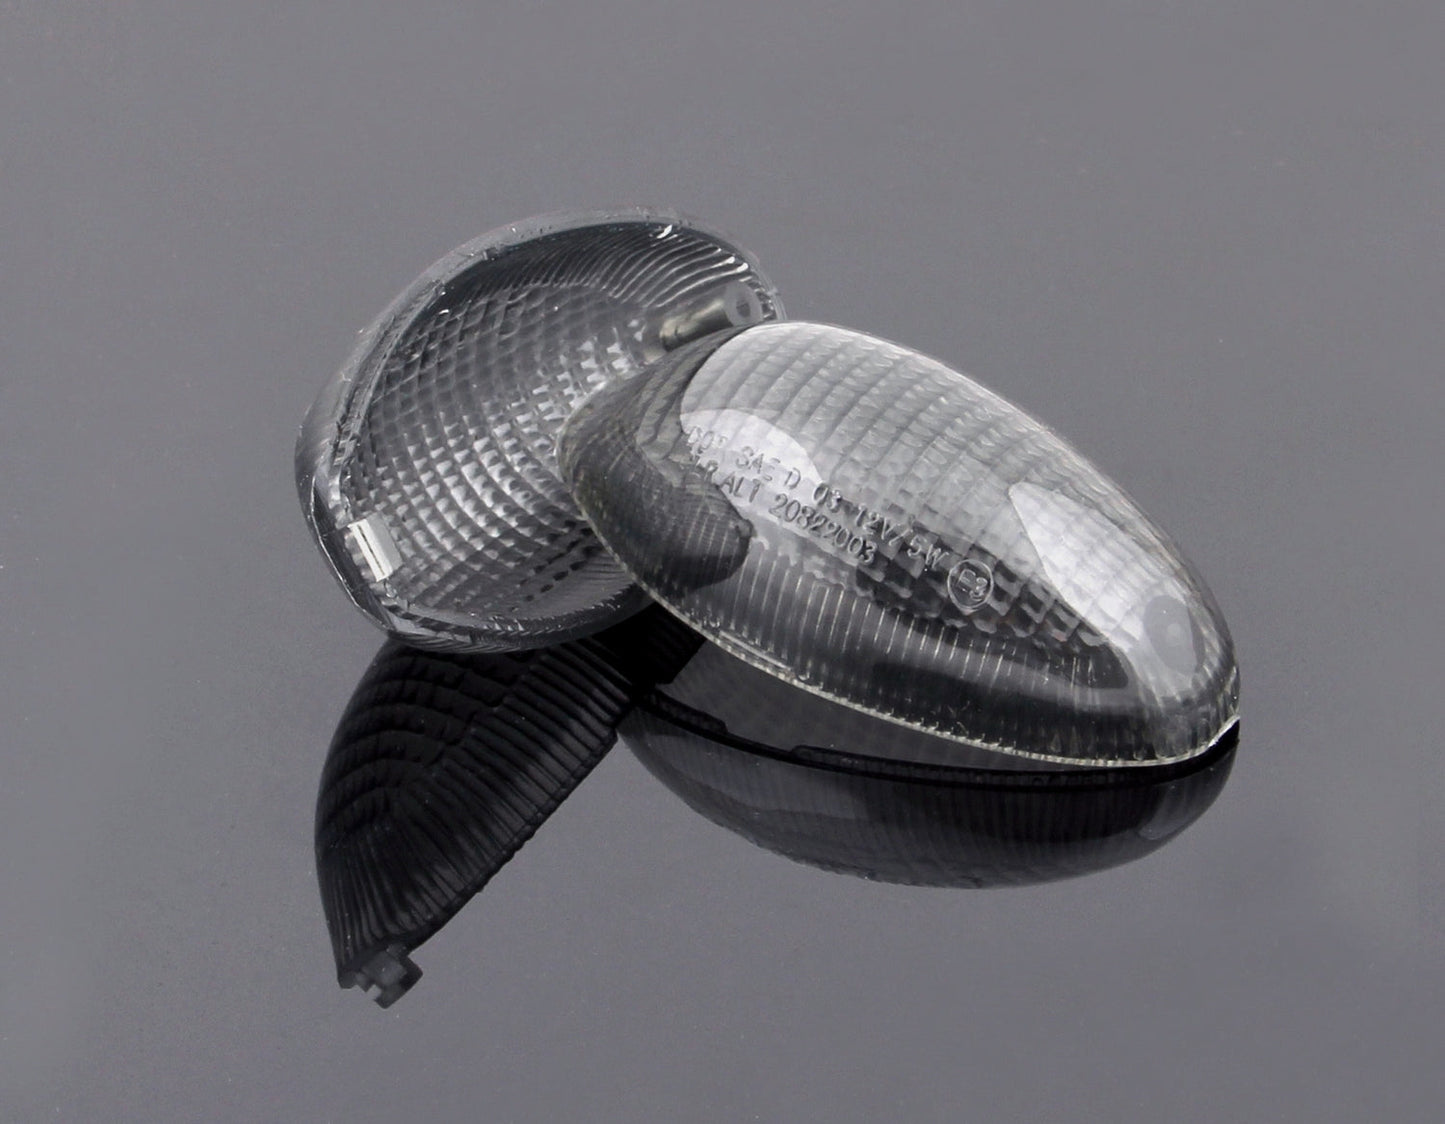 Front Turn Signals Lens For Ducati Monster 2001-2005 Clear